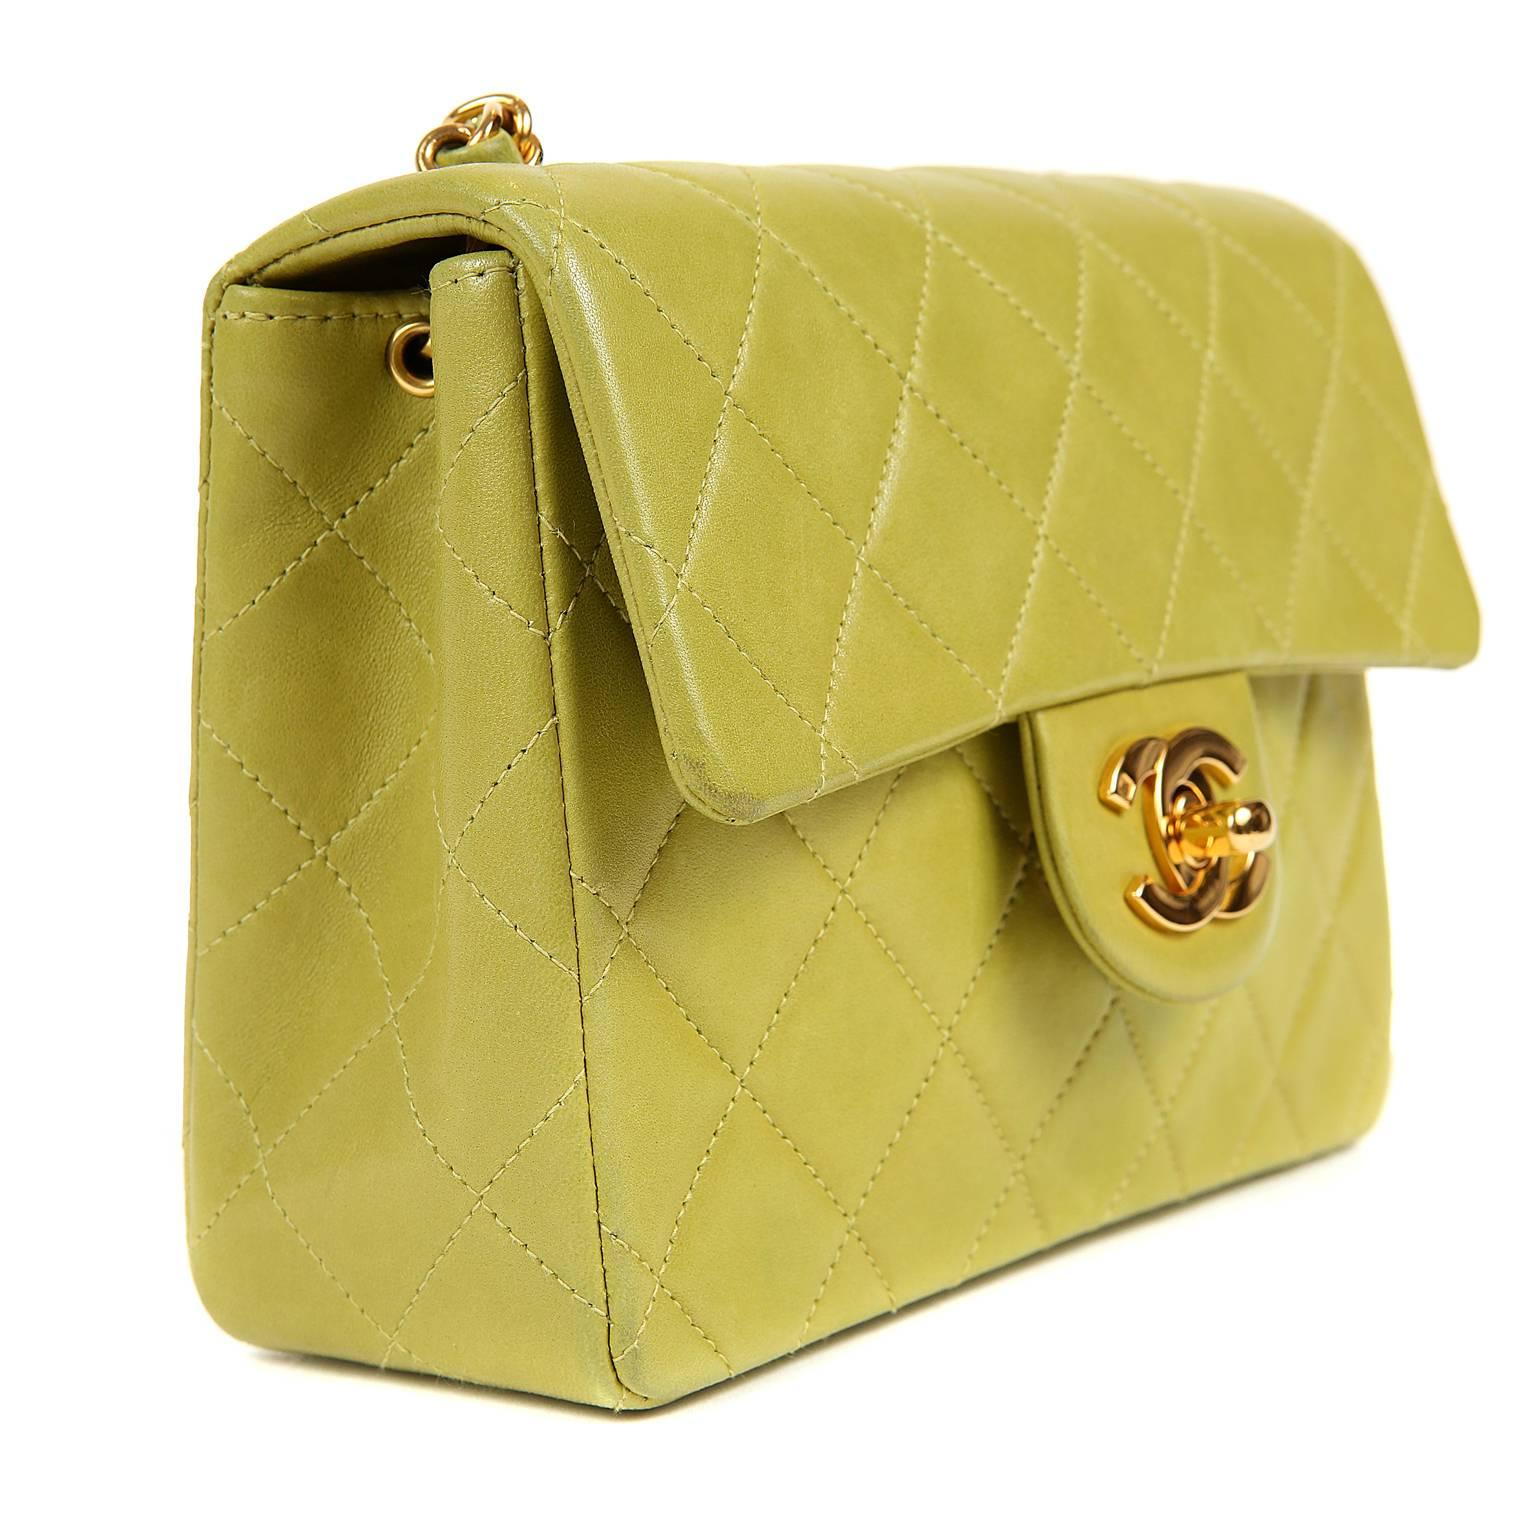 Chanel Chartreuse Lambskin Mini Classic- EXCELLENT PLUS
  Perfect for carrying just the essentials, the hands-free style has an extra-long strap for cross body wear. 

Remarkably neutral chartreuse green lambskin is quilted in signature Chanel